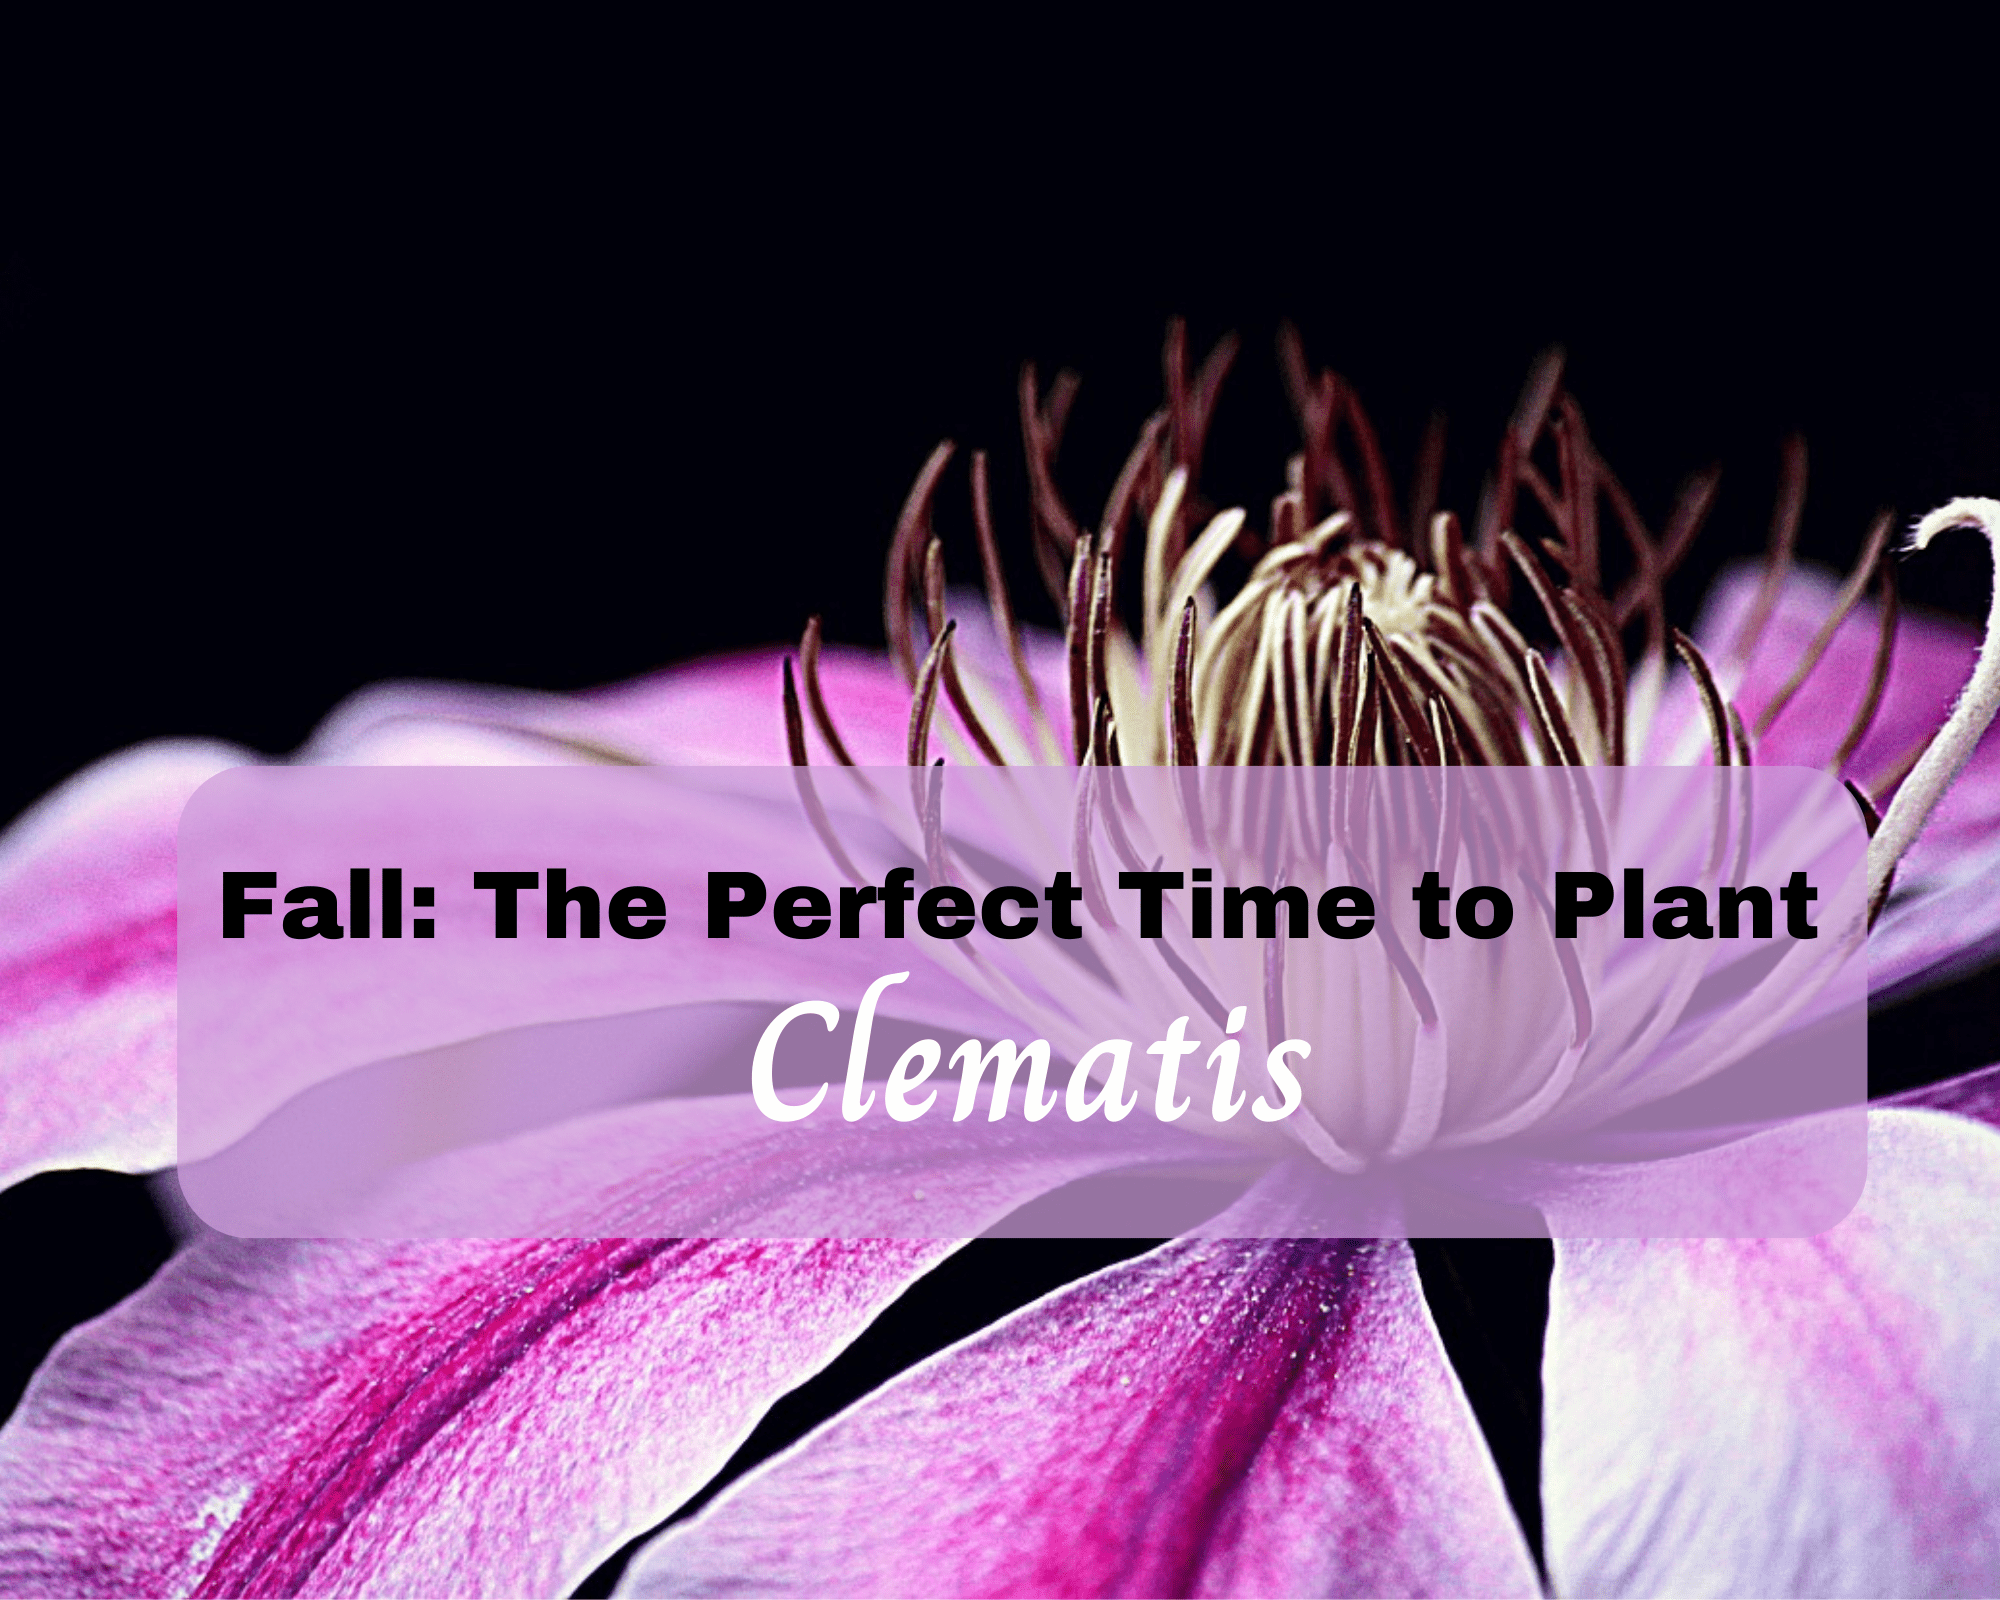 How to plant clematis this fall